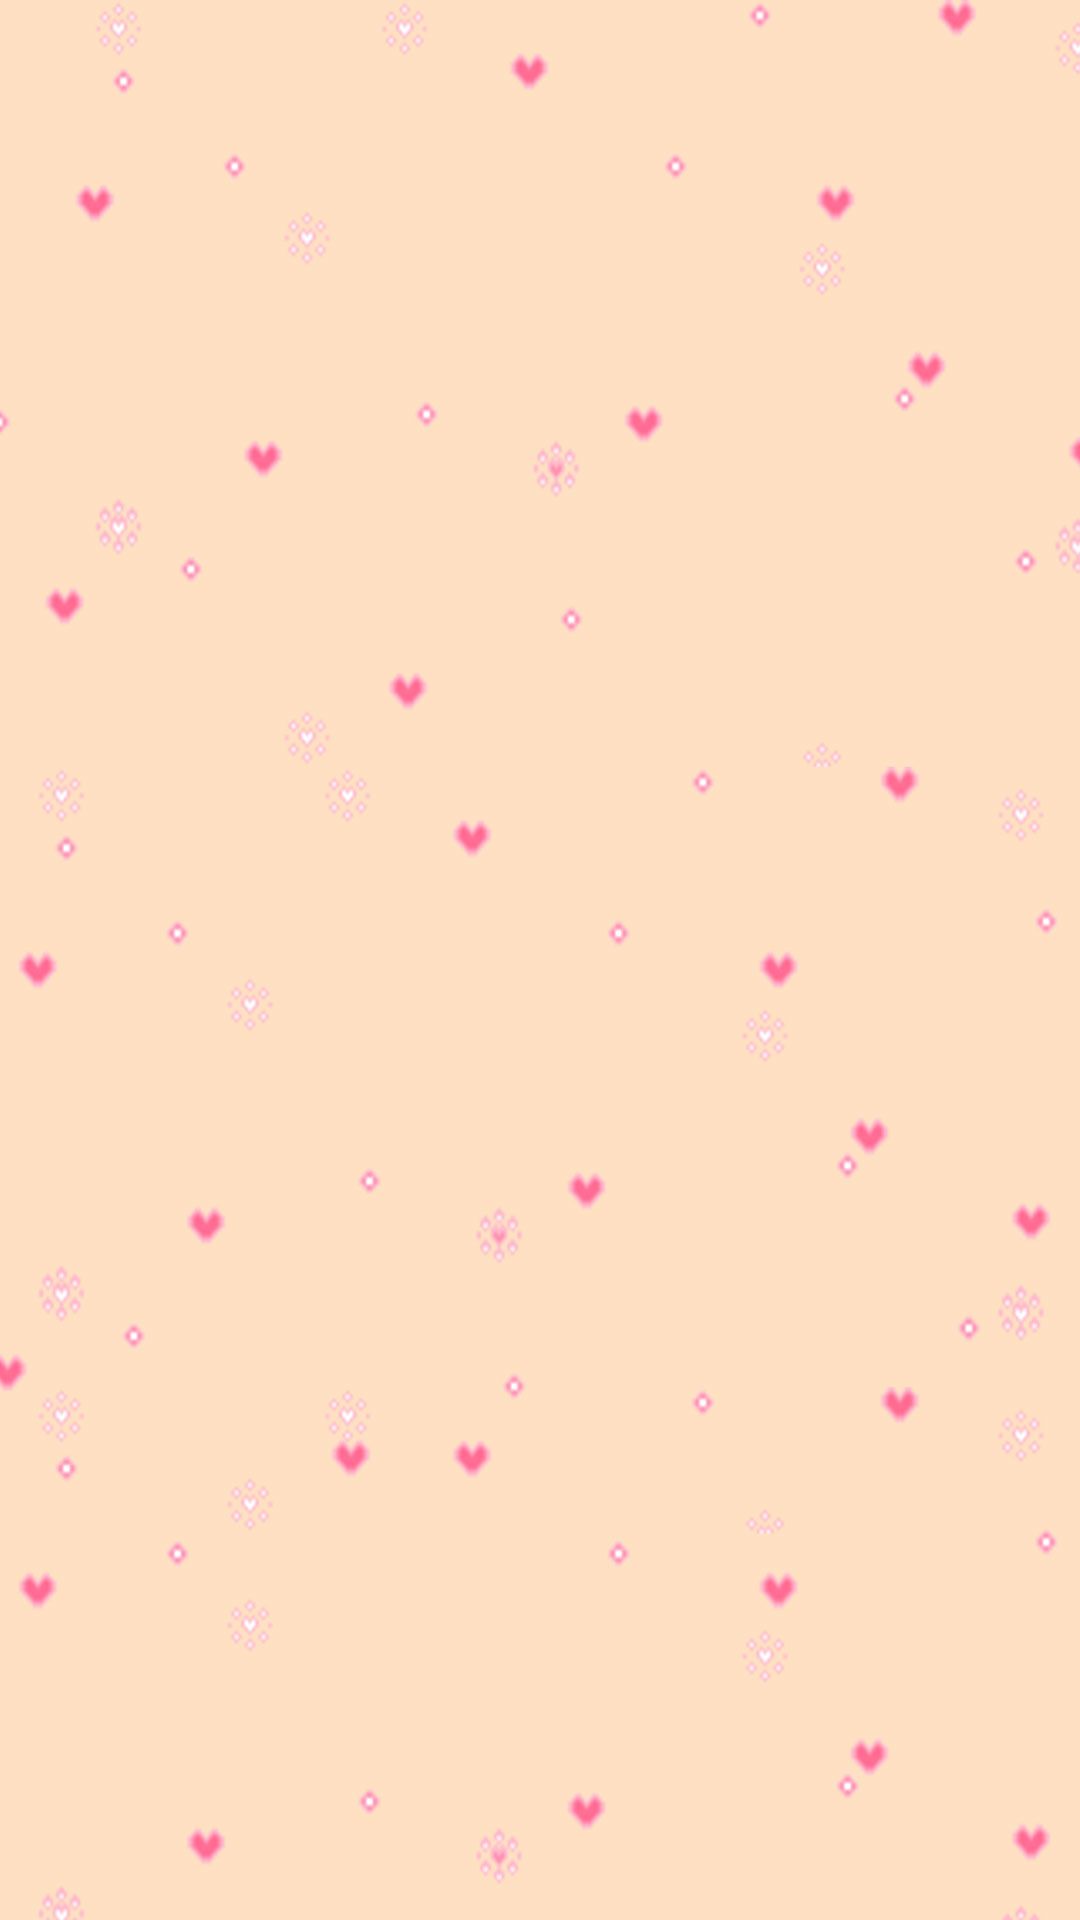 A pink background with hearts and dots - Colorful, peach, pattern